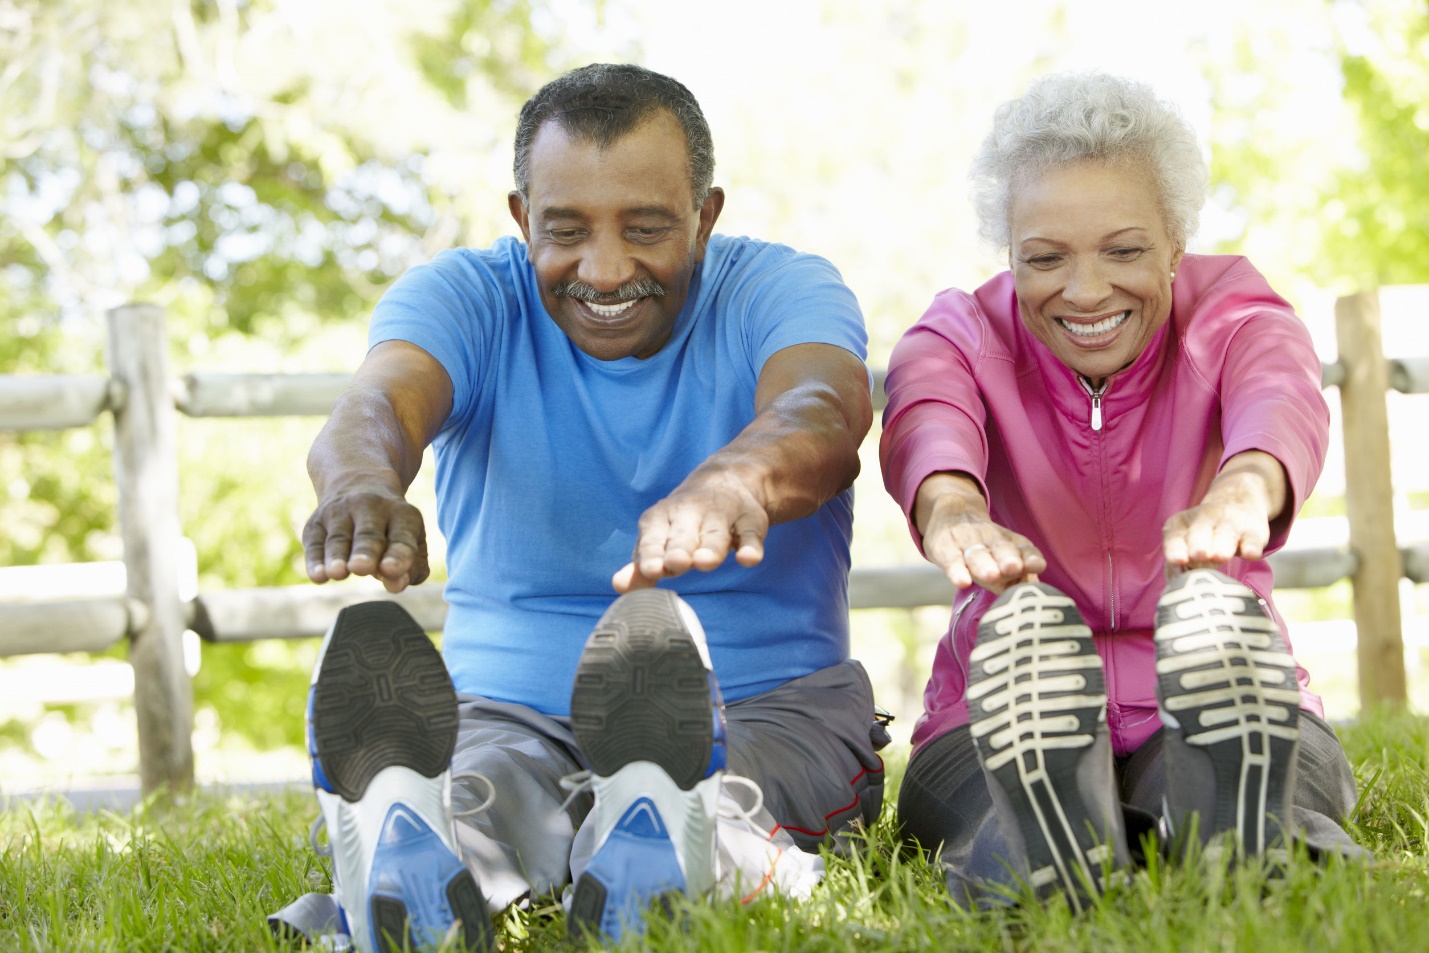 A husband and wife stretching is one of the types of exercises for seniors